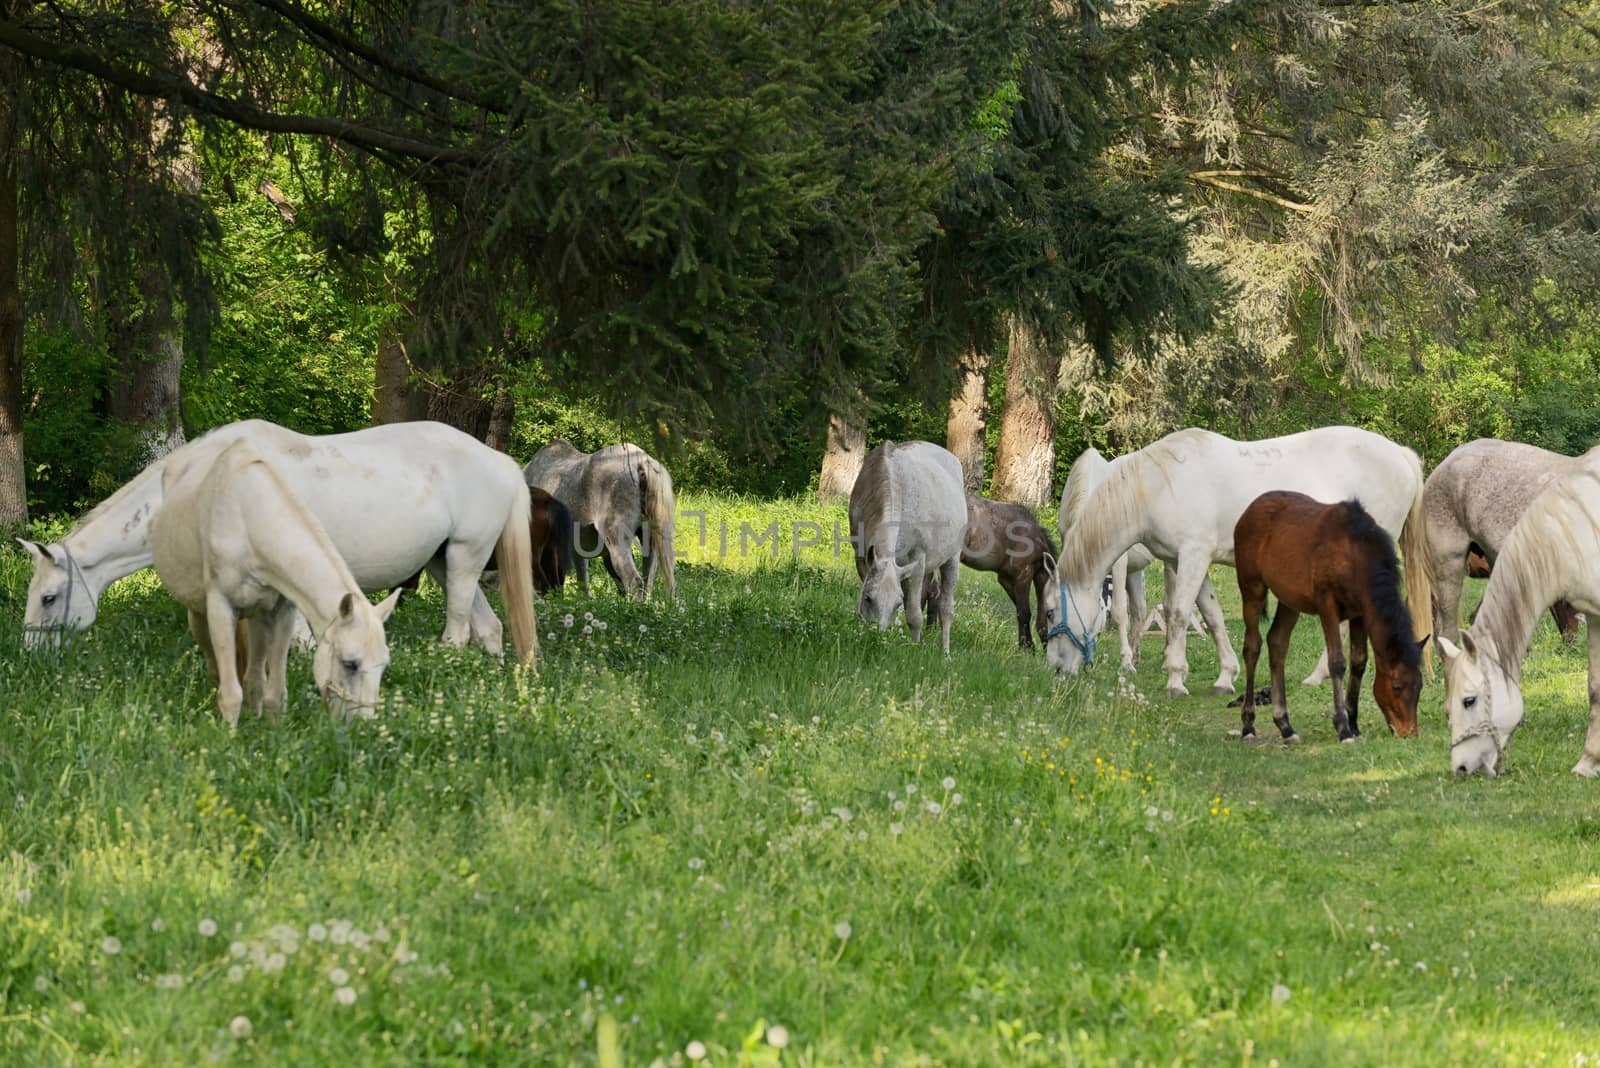 Herd of horses on the spring field